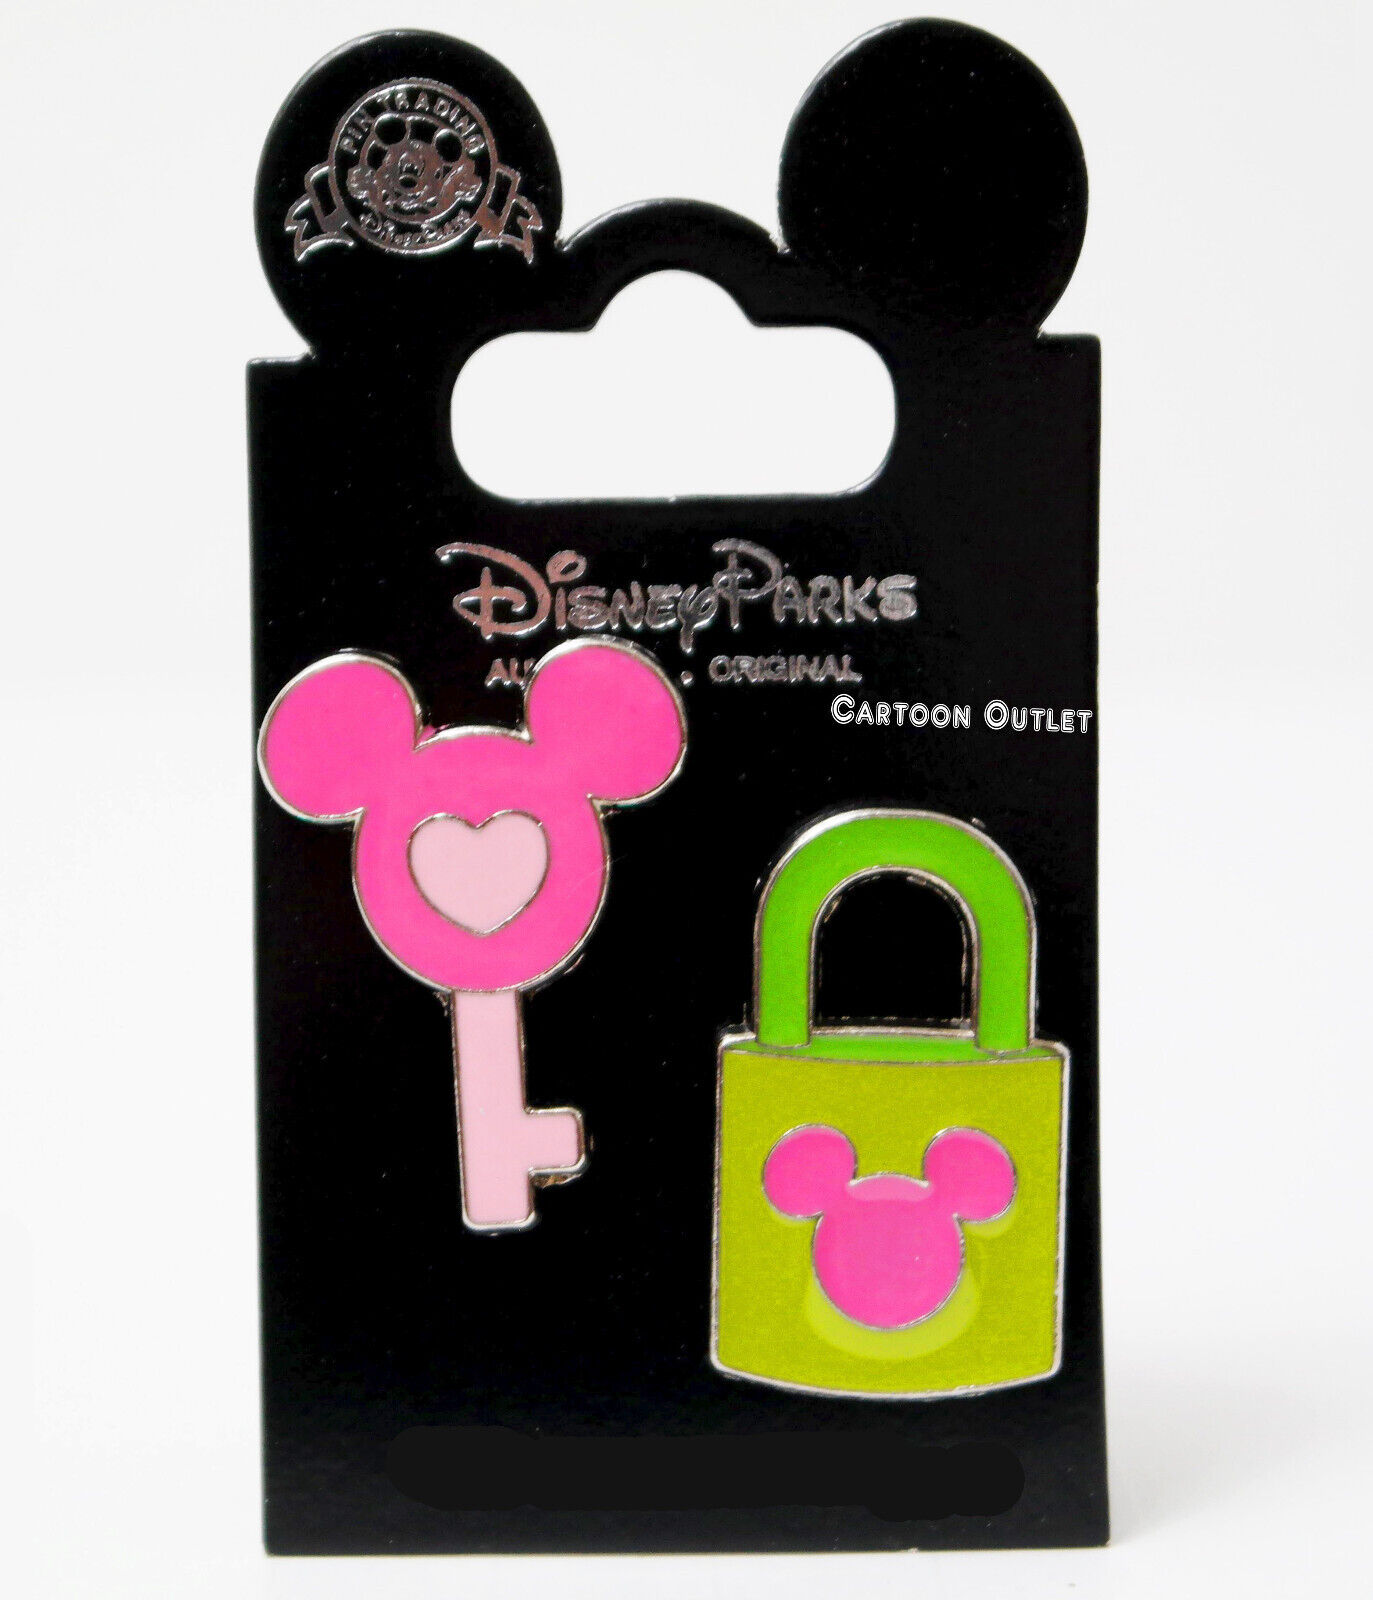 Disney Parks Mickey Mouse Lock And Pink Key Trading Pin Authentic Original Gift